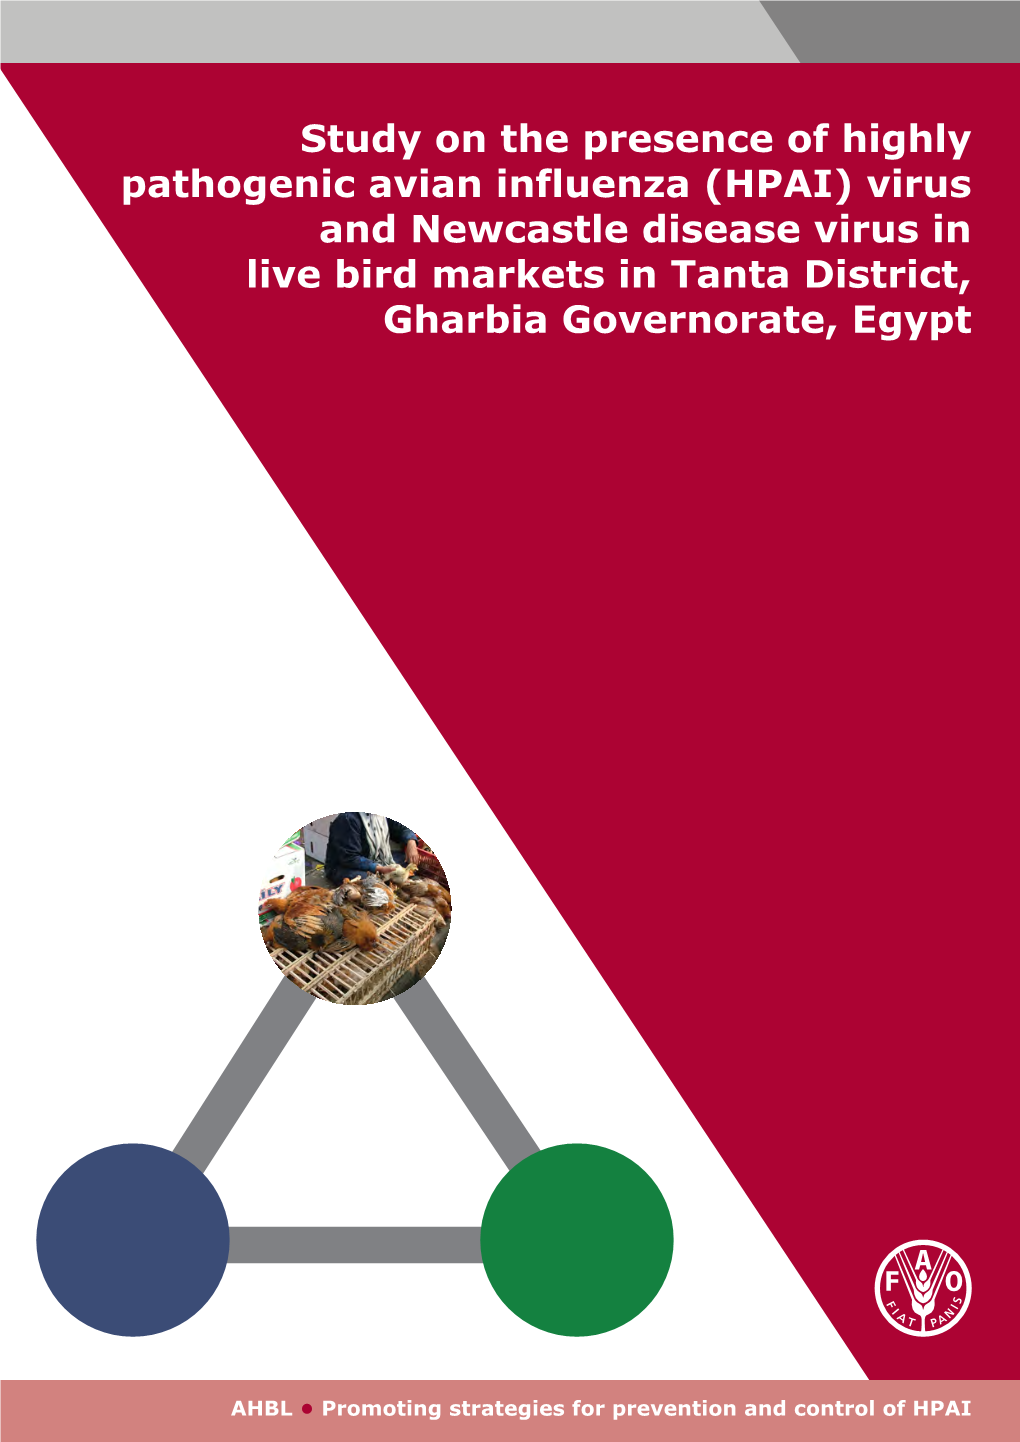 Study on the Presence of Highly Pathogenic Avian Influenza (HPAI) Virus and Newcastle Disease Virus in Live Bird Markets in Tanta District, Gharbia Governorate, Egypt